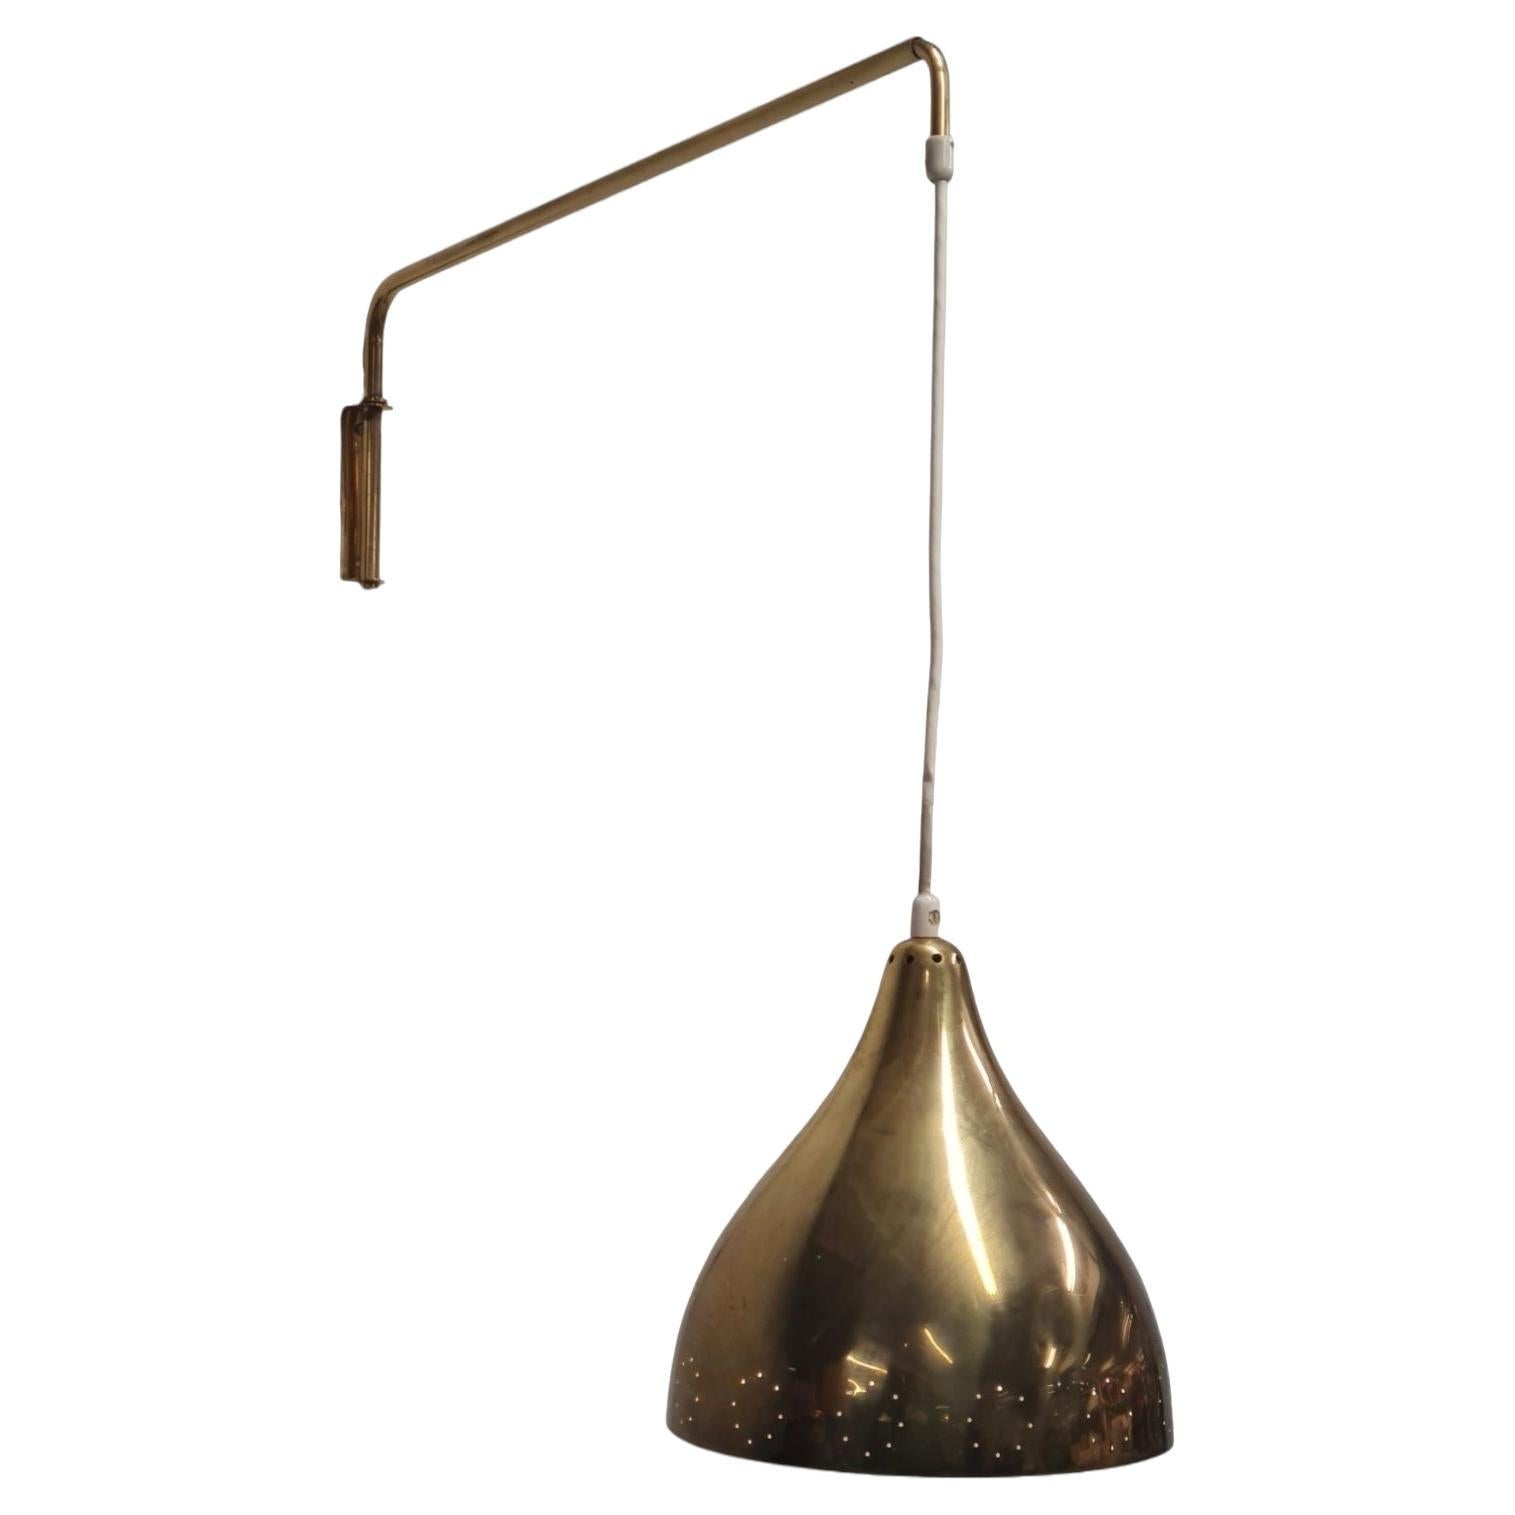 Itsu Telescopic Wall Lamp Model AO 1 in Perfortated Brass